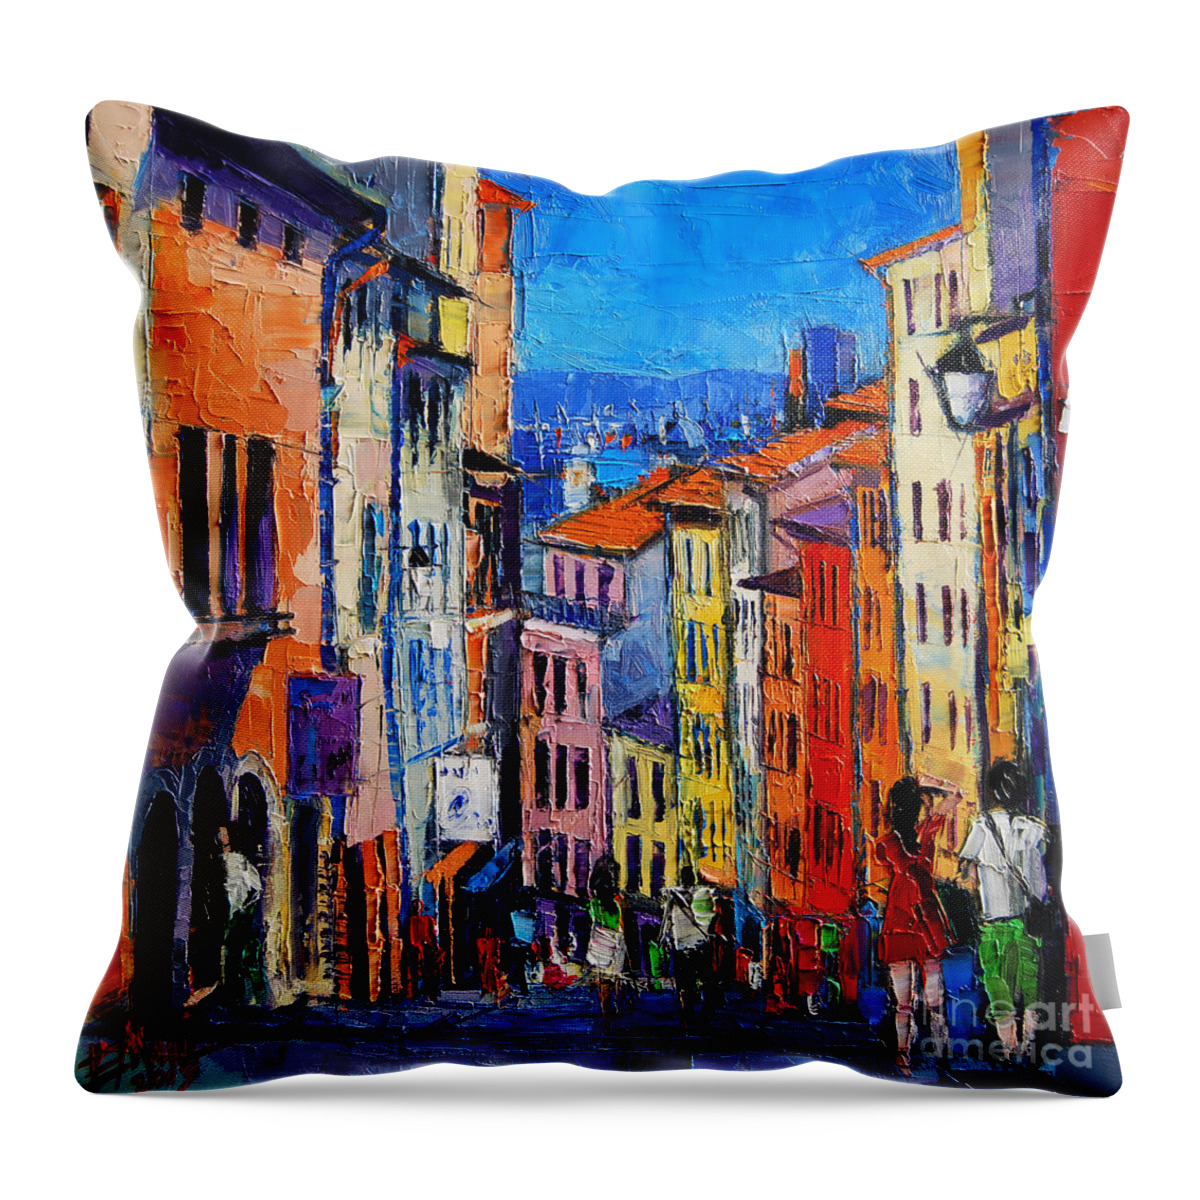 Lyon Colorful Cityscape Throw Pillow featuring the painting Lyon Colorful Cityscape by Mona Edulesco